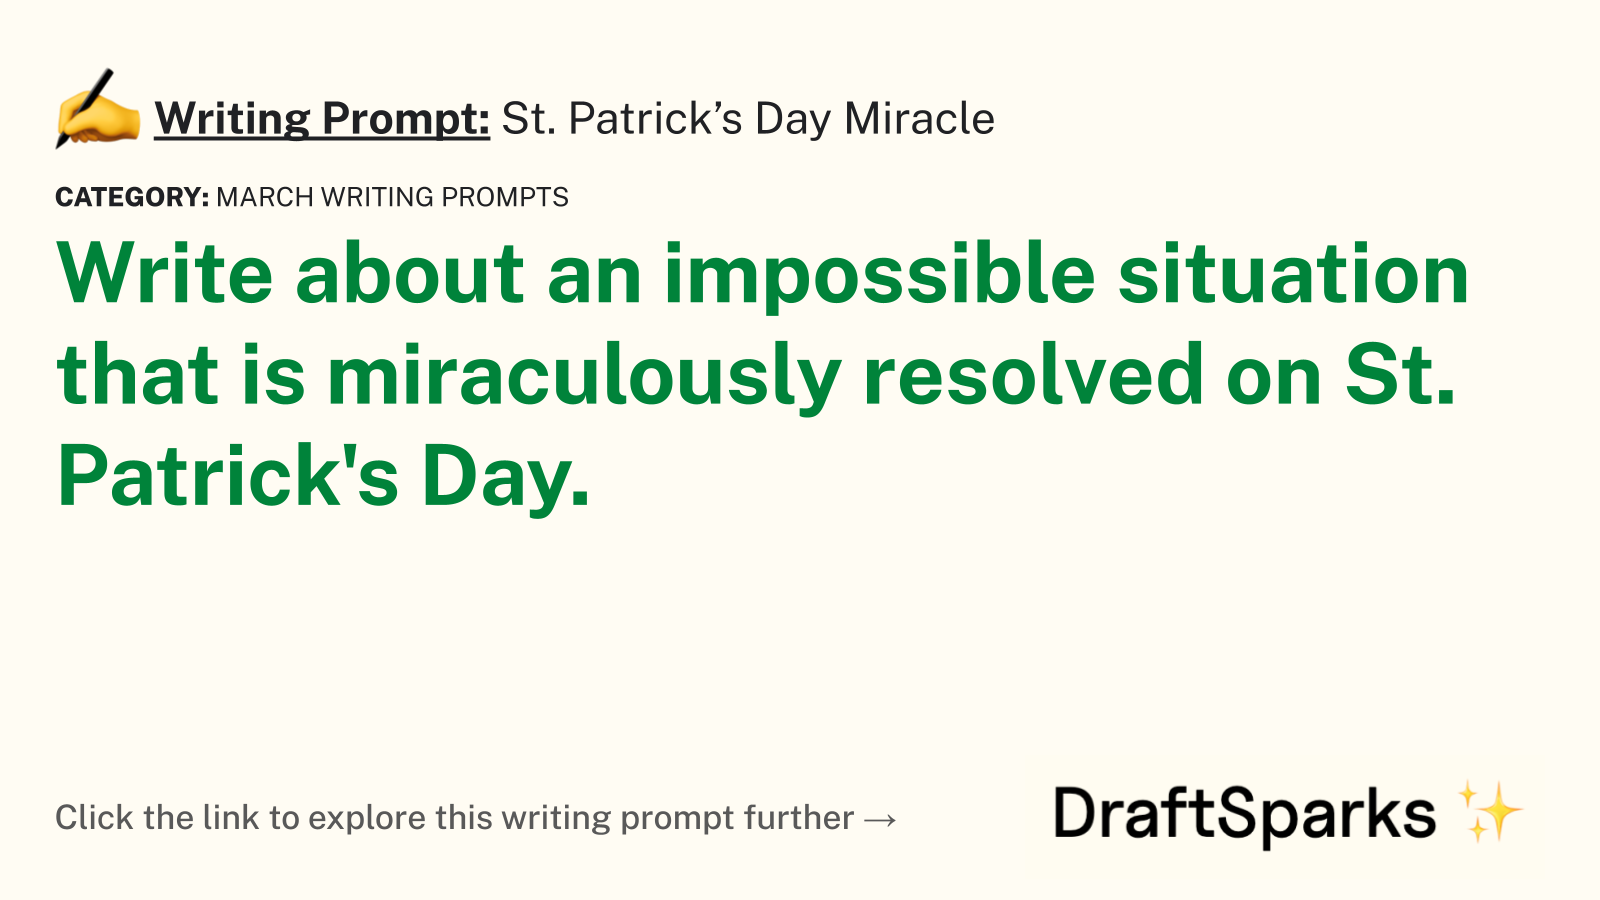 St. Patrick’s Day Miracle